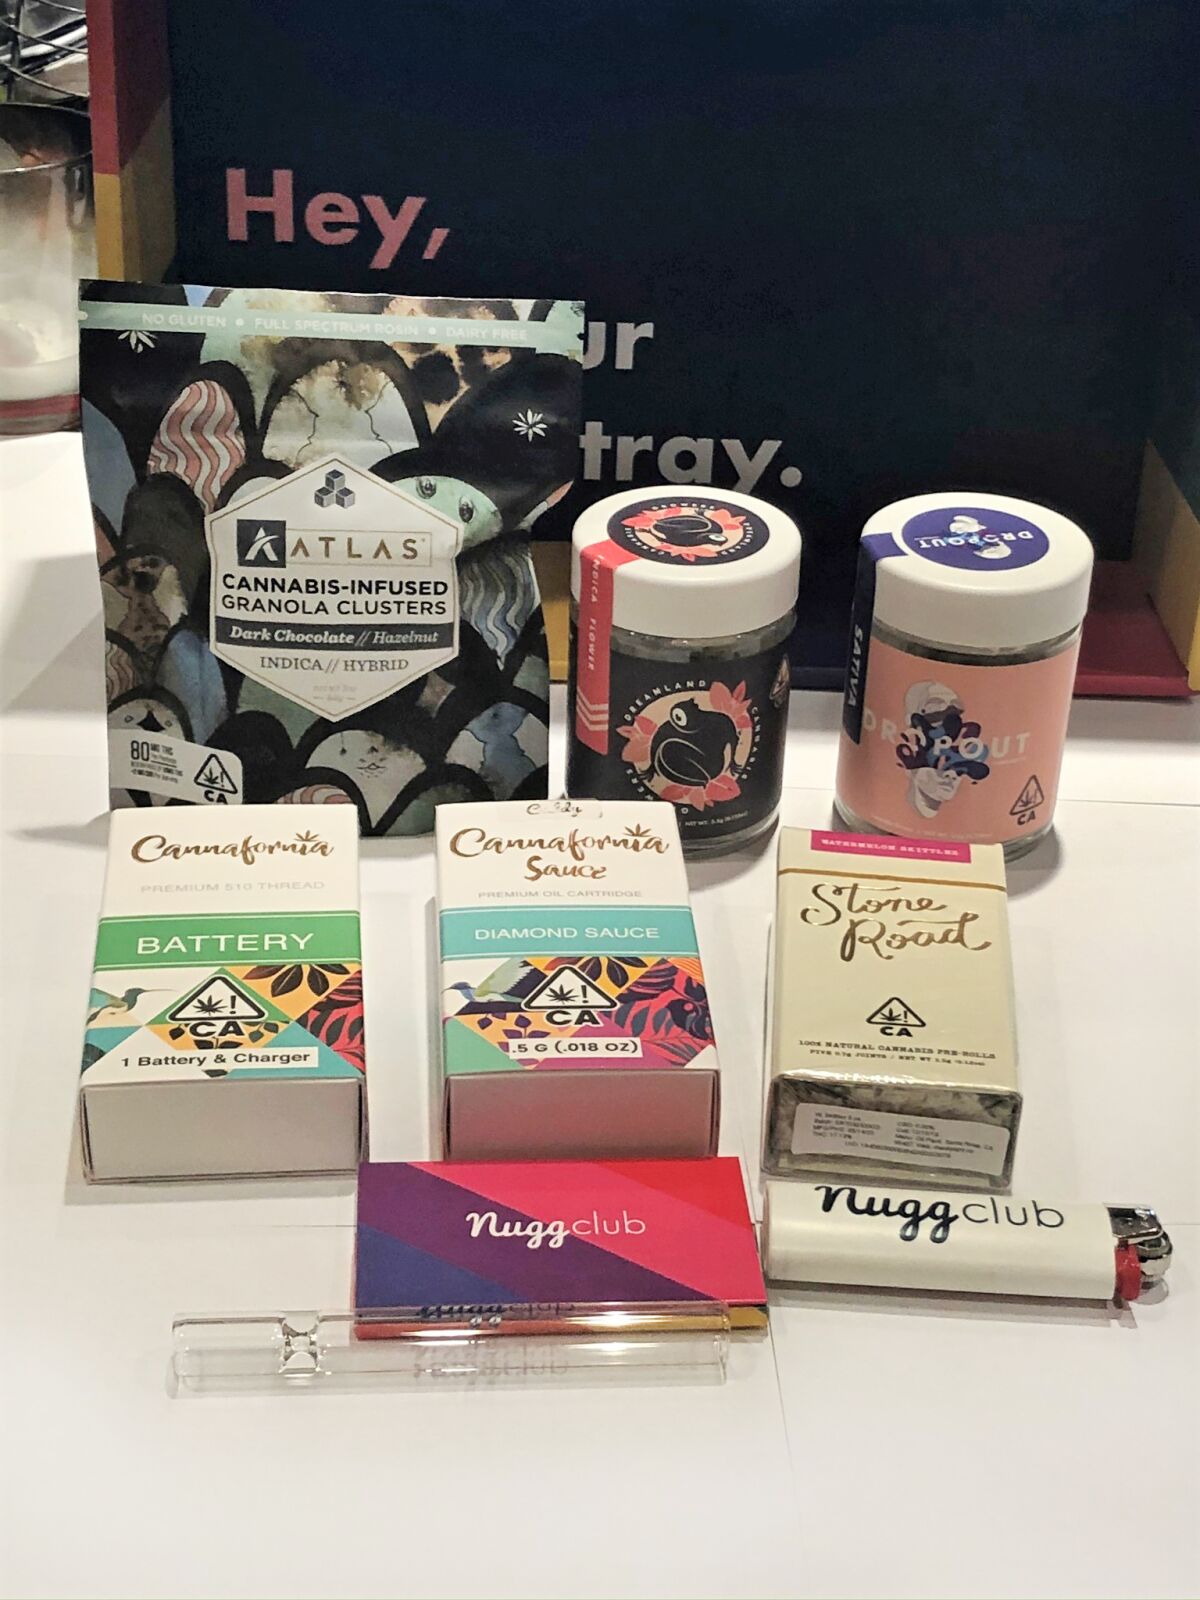 A display of five cannabis products and some smoking accoutrements from the June Nugg Club subscription box.